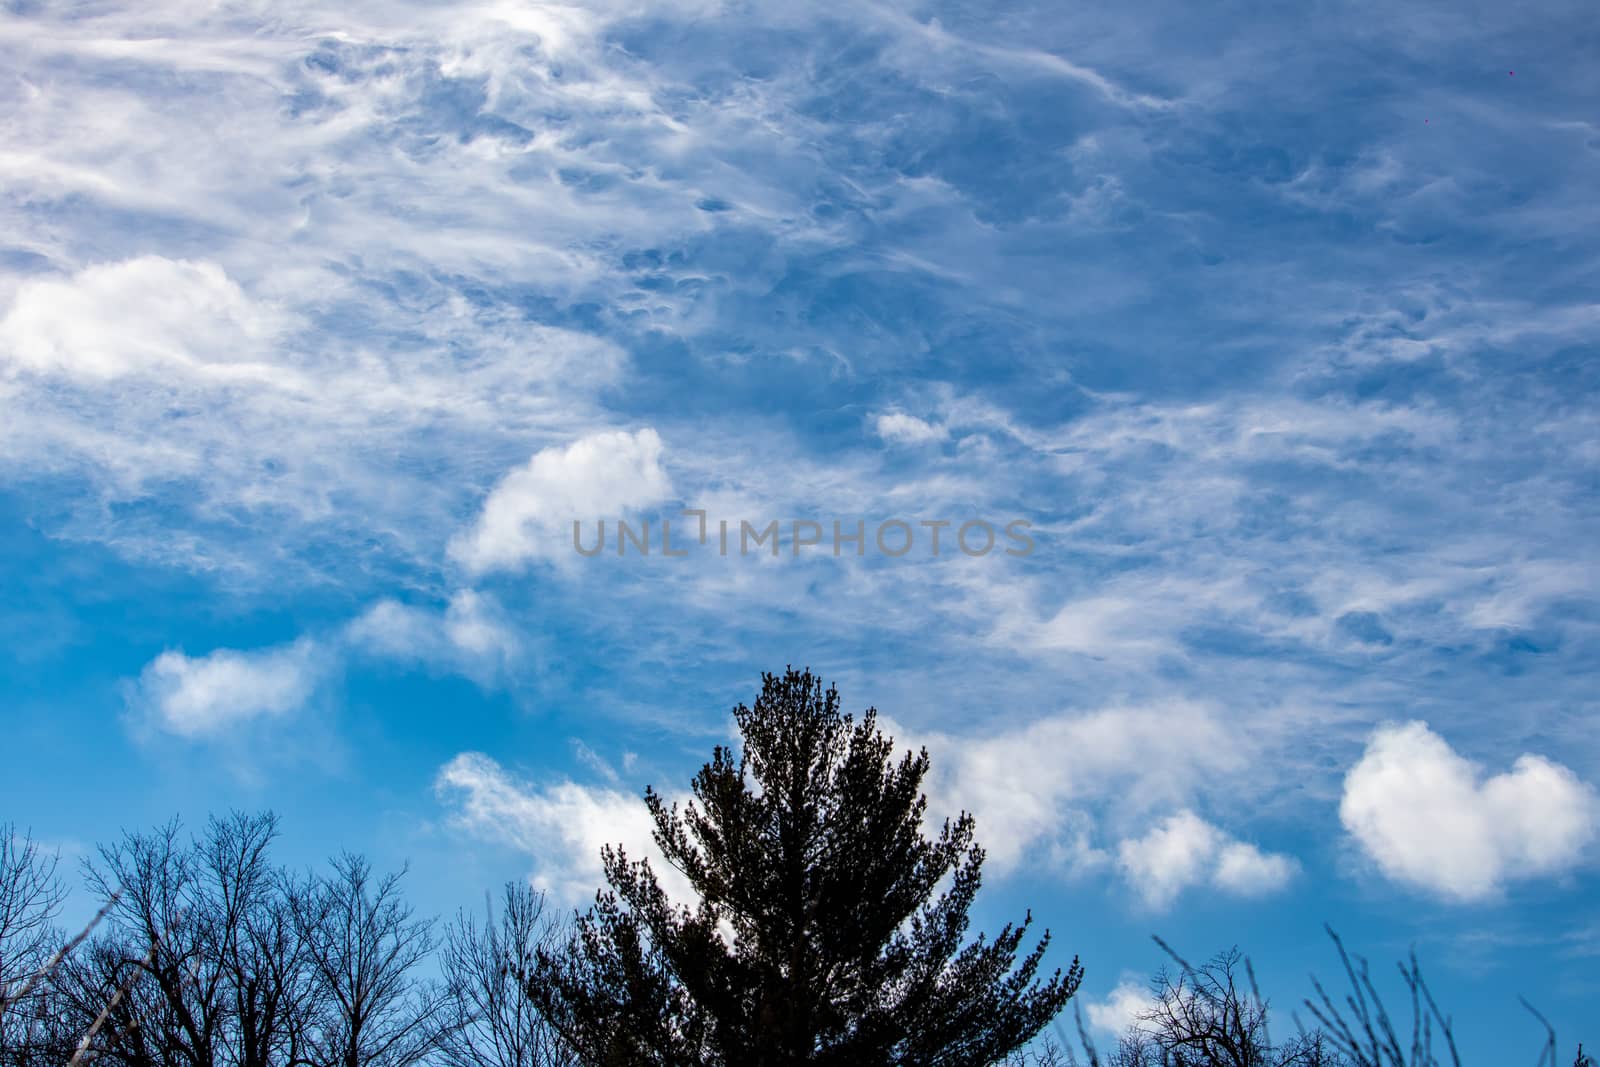 Cirrus clouds high in the atmosphere are seen swirling and forming interesting textures in the blue sky. Treetops, including a central evergreen, are silhouettes against the wisps of cloud.